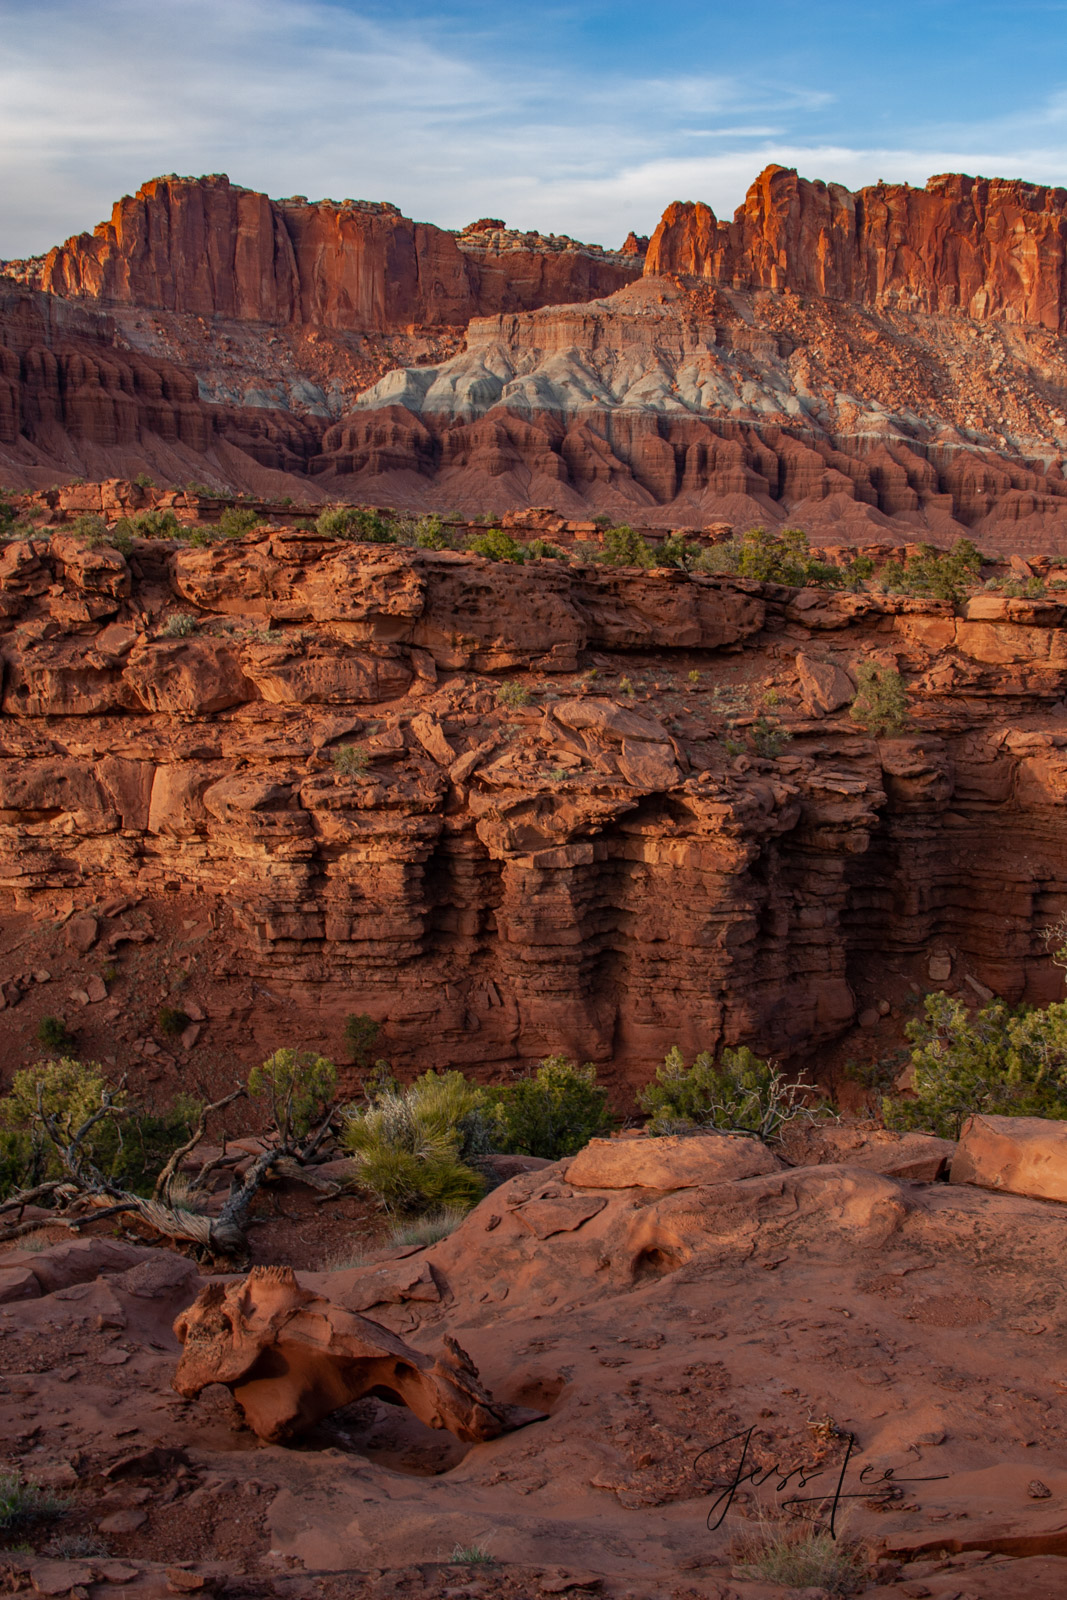 Vertical Reef a Limited Edition of 50 Fine Art Prints The Reef: Capitol Reef, San Rafael Swell and the Waterpocket Fold are some...